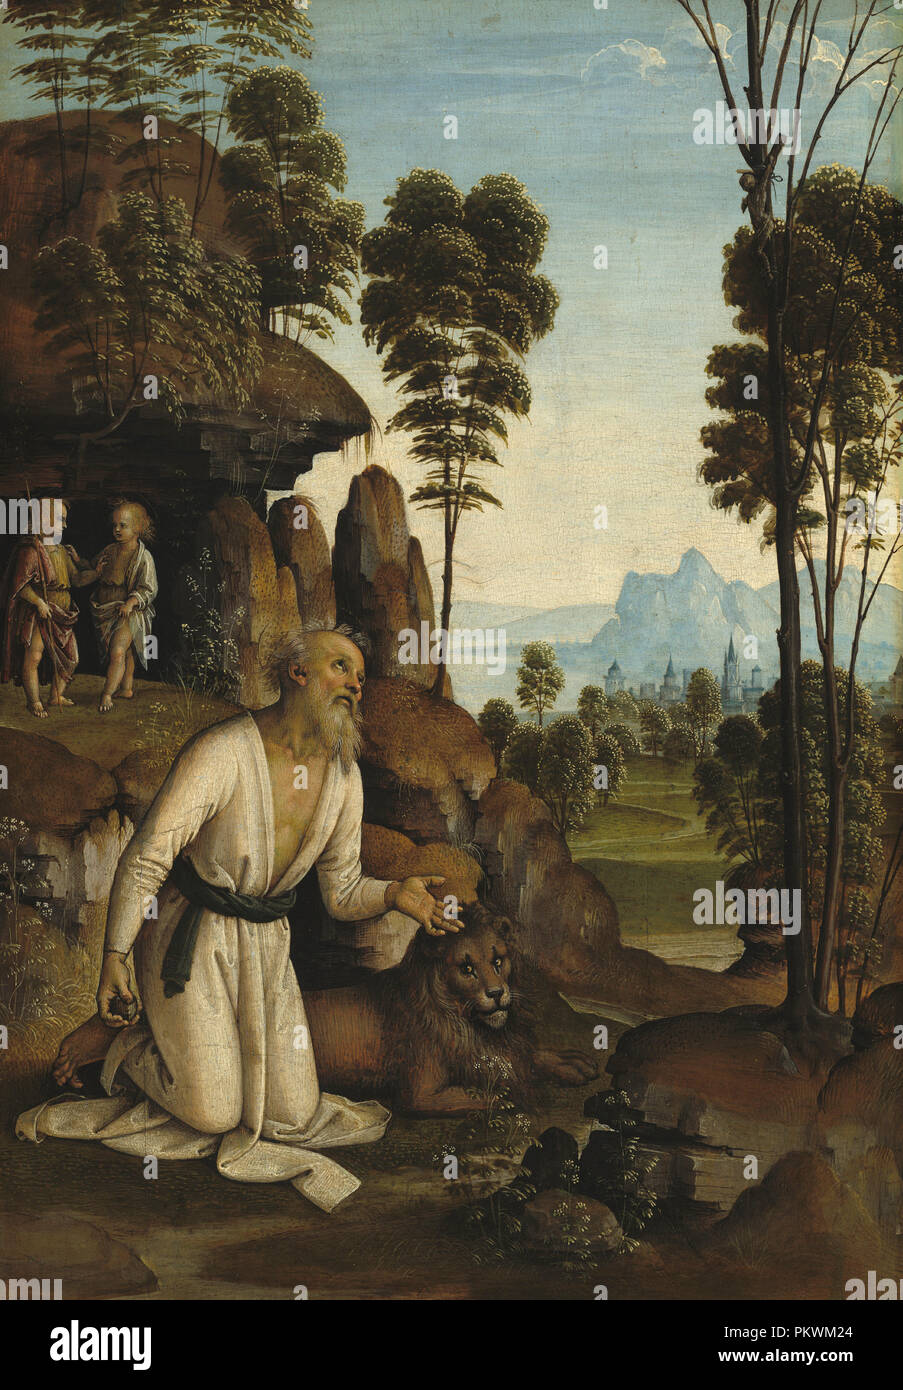 Saint Jerome in the Wilderness. Dated: c. 1490/1500. Dimensions: overall: 60 x 41.9 cm (23 5/8 x 16 1/2 in.)  framed: 73.7 x 55.3 x 9.8 cm (29 x 21 3/4 x 3 7/8 in.). Medium: tempera on poplar panel. Museum: National Gallery of Art, Washington DC. Author: Follower of Pietro Perugino. Stock Photo